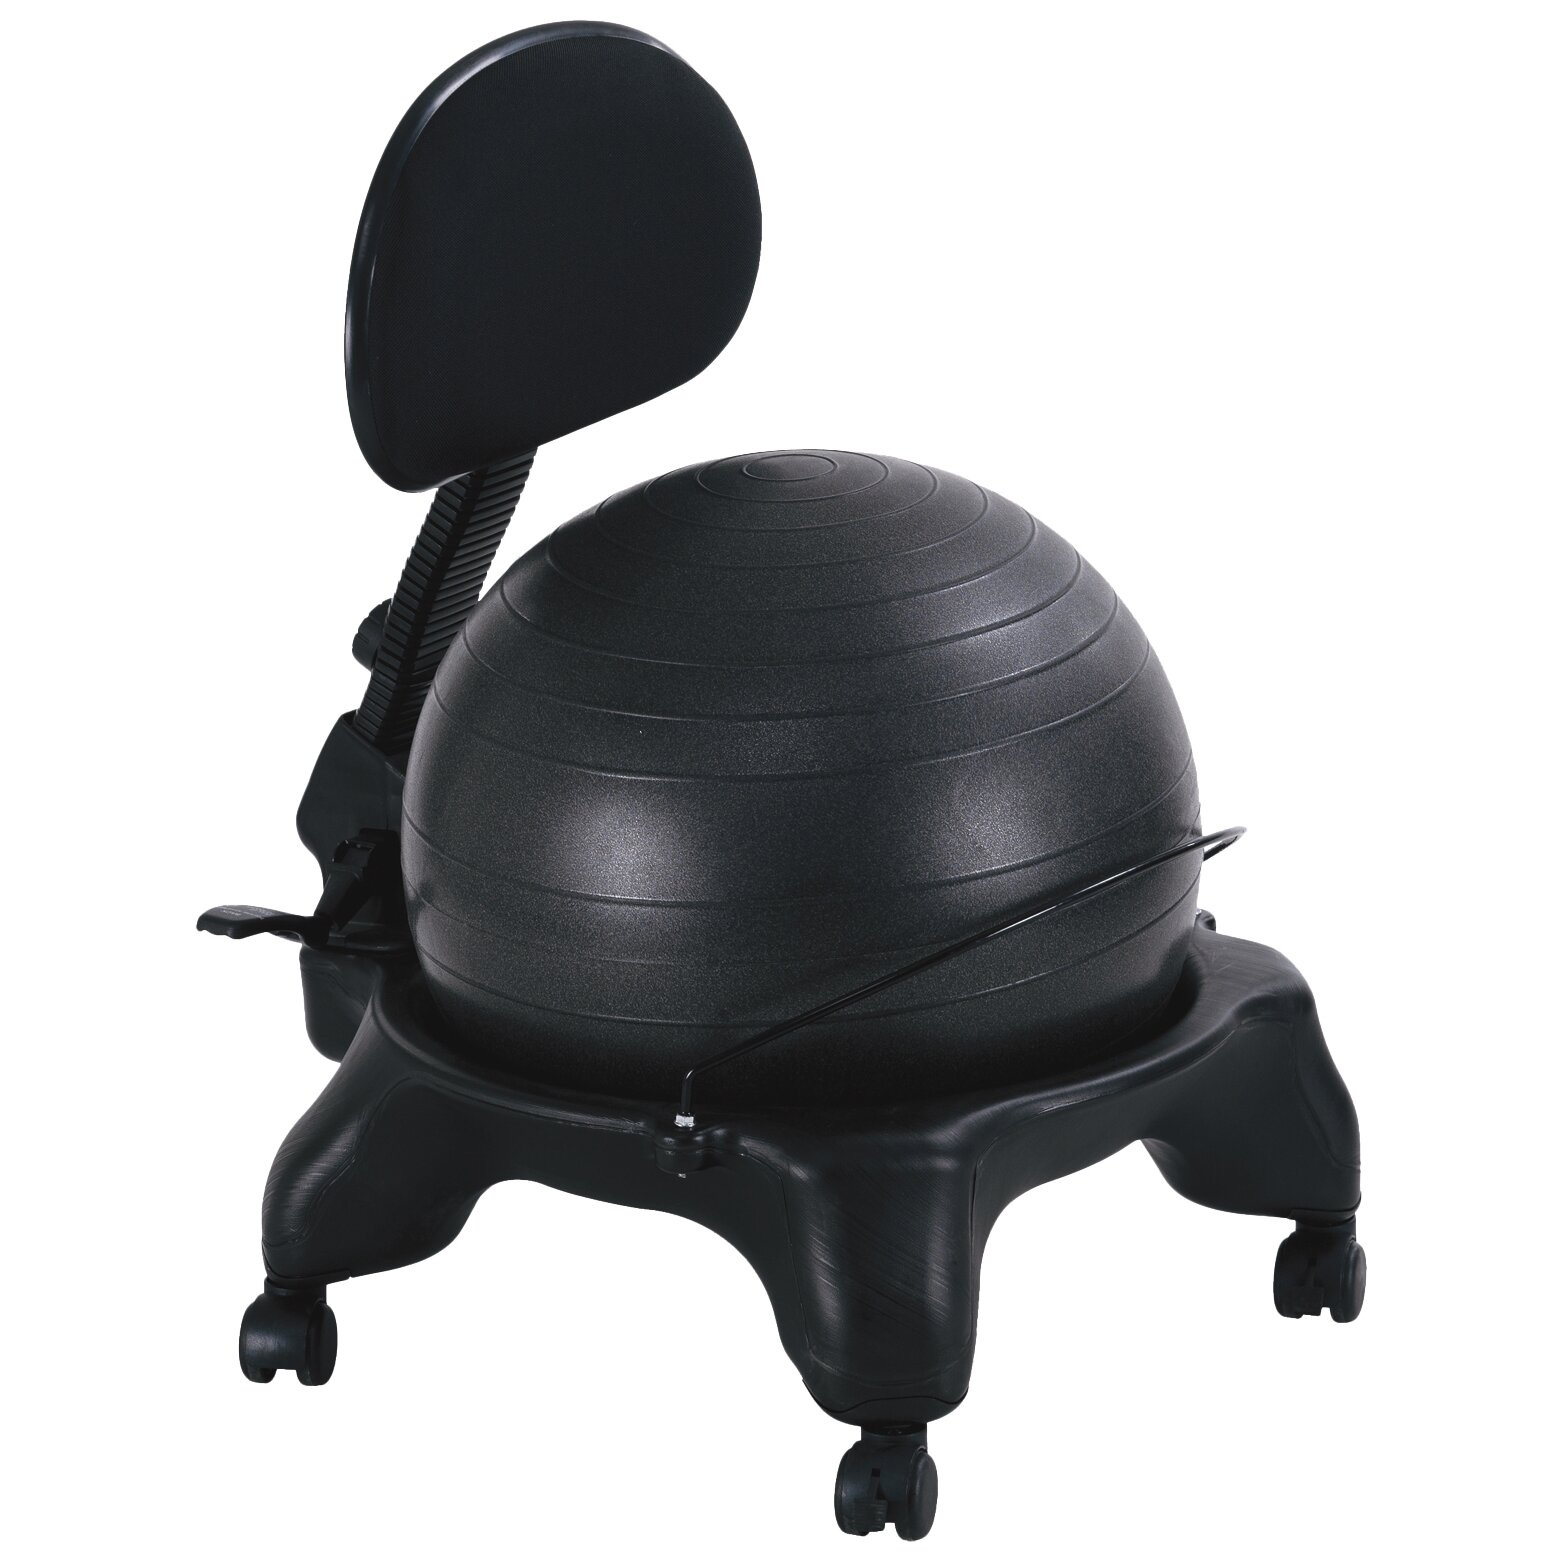 Adjustable Fit Ball Chair 